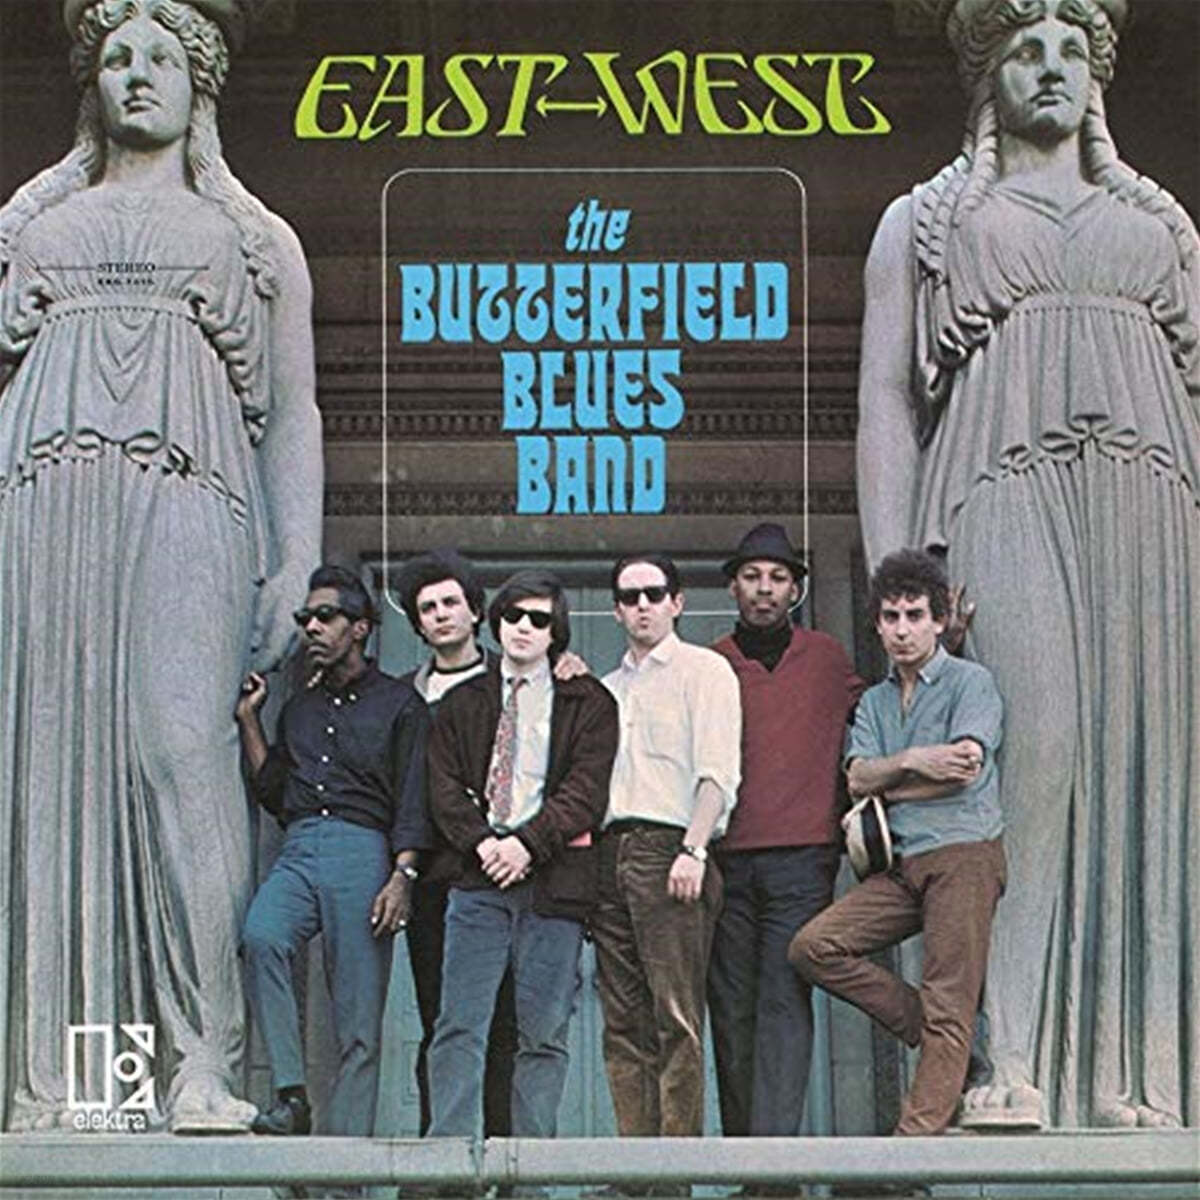 Butterfield Blues Band (버터필드 블루스 밴드) - East-West [LP] 